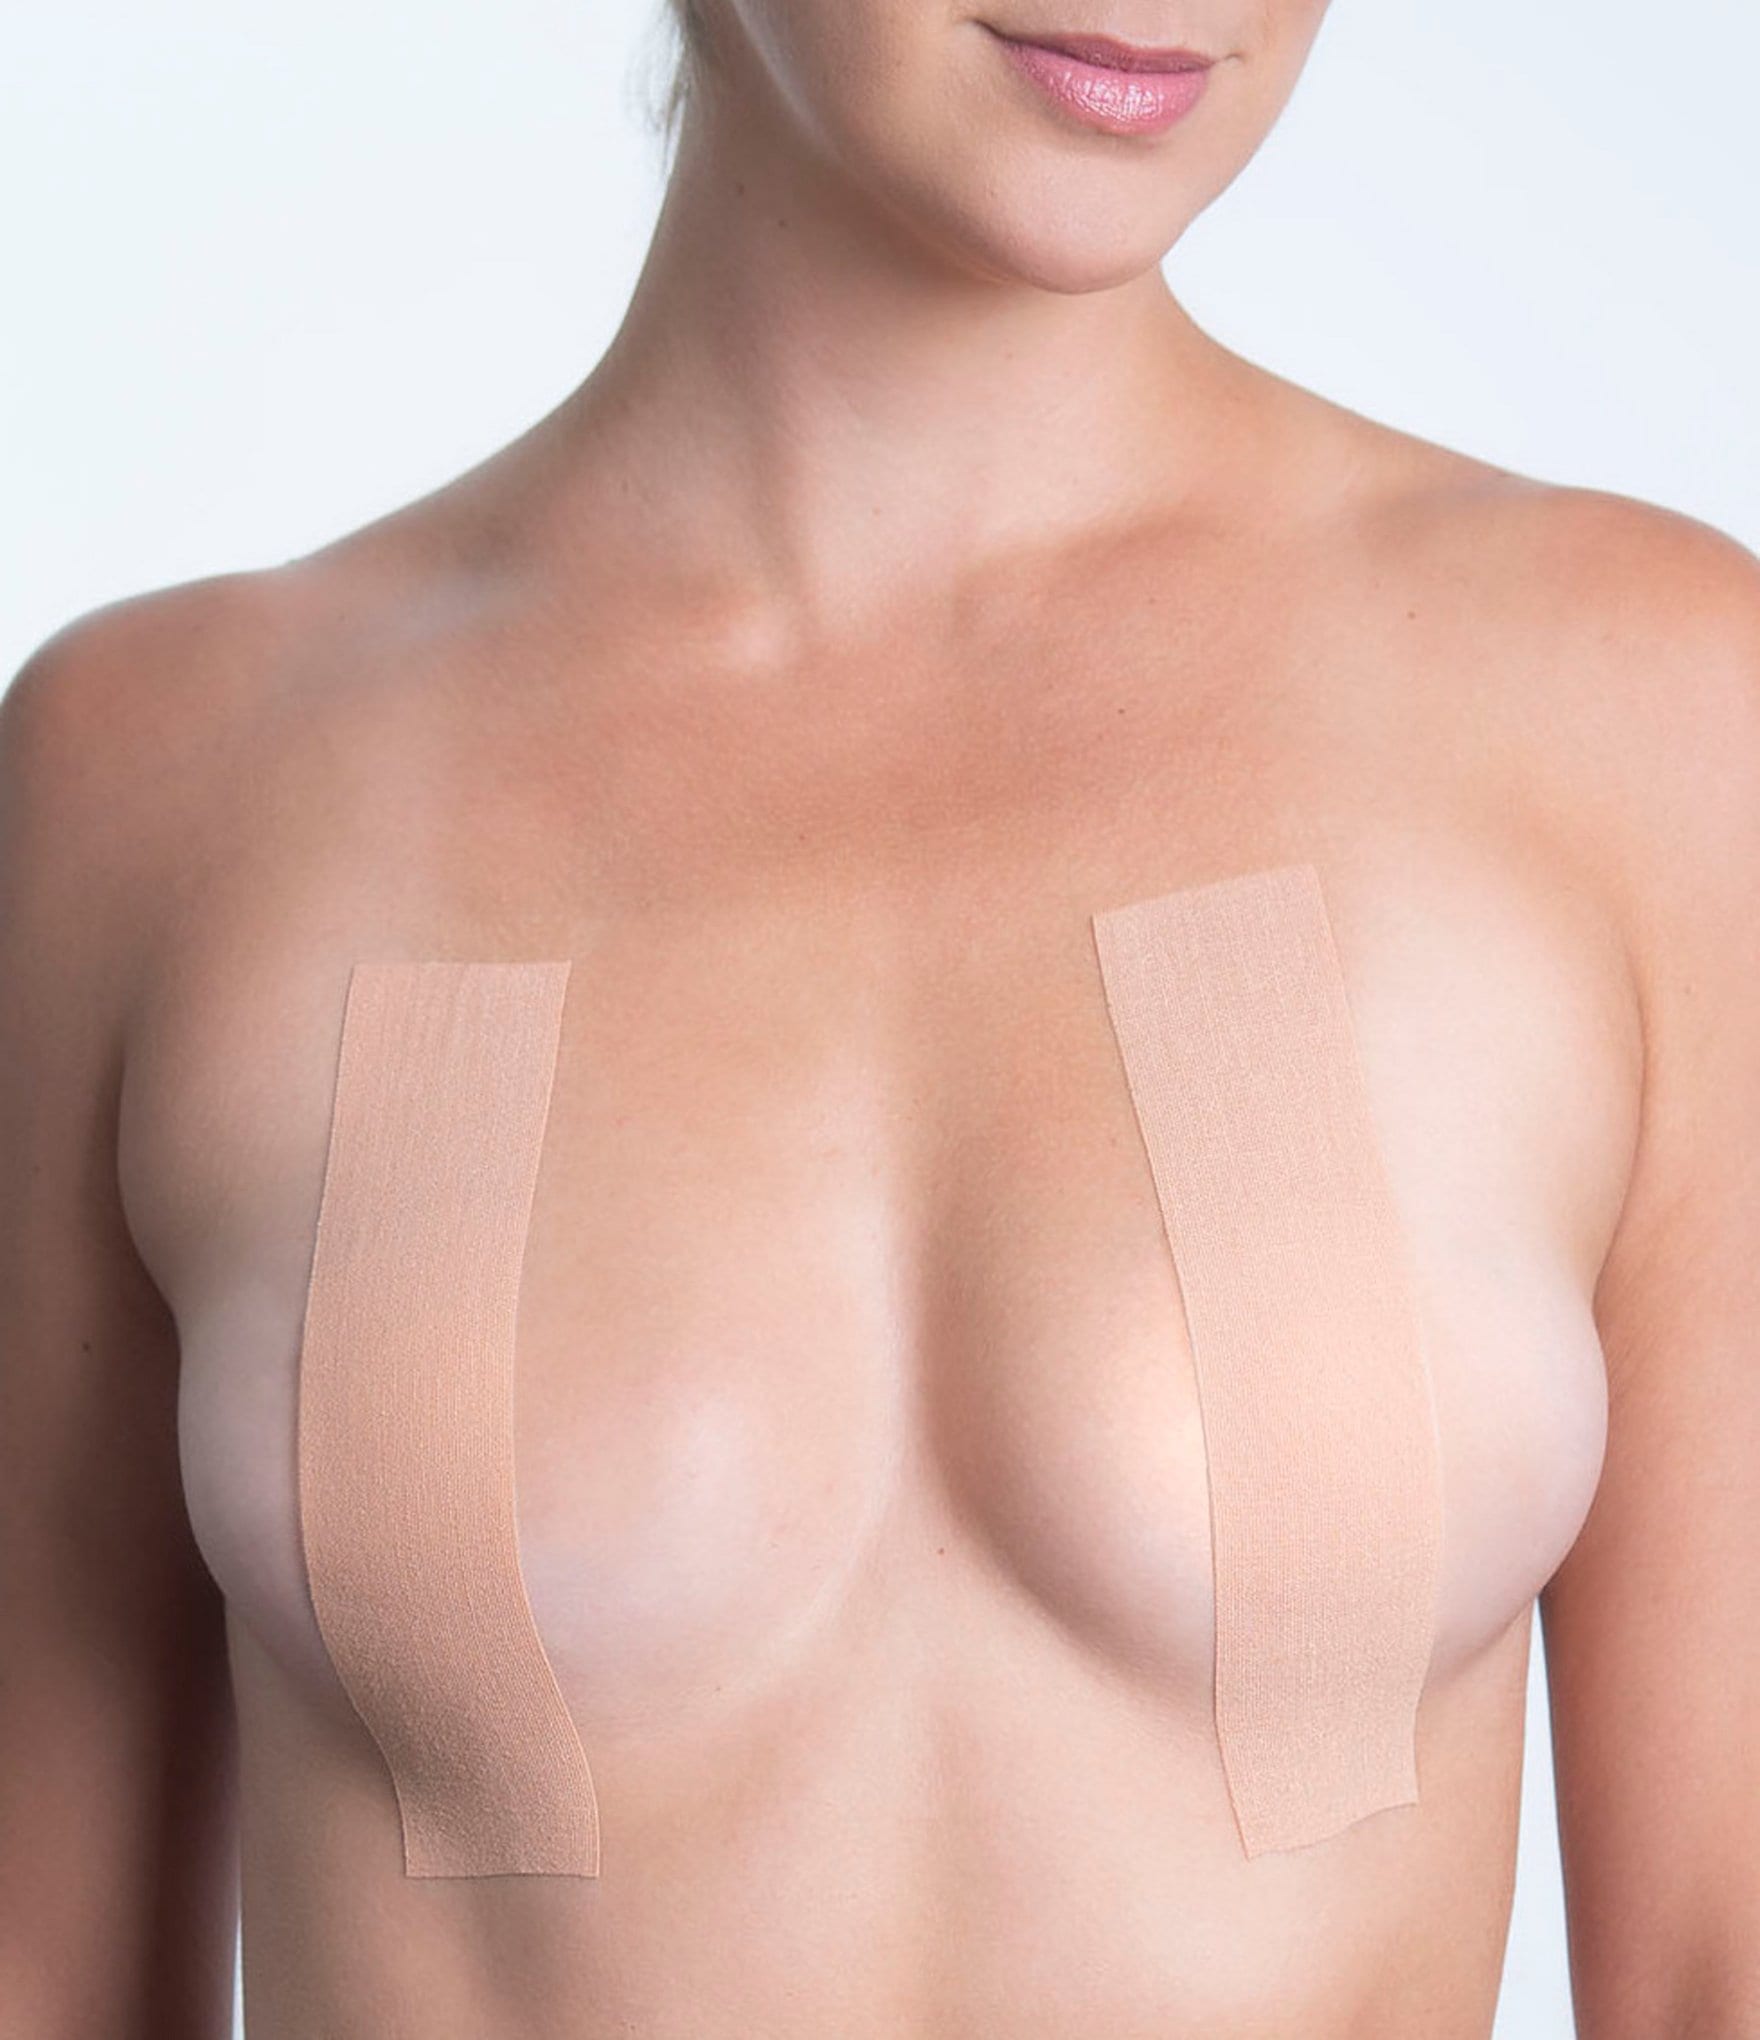 Nue  Breast Tape For All Skin Tones